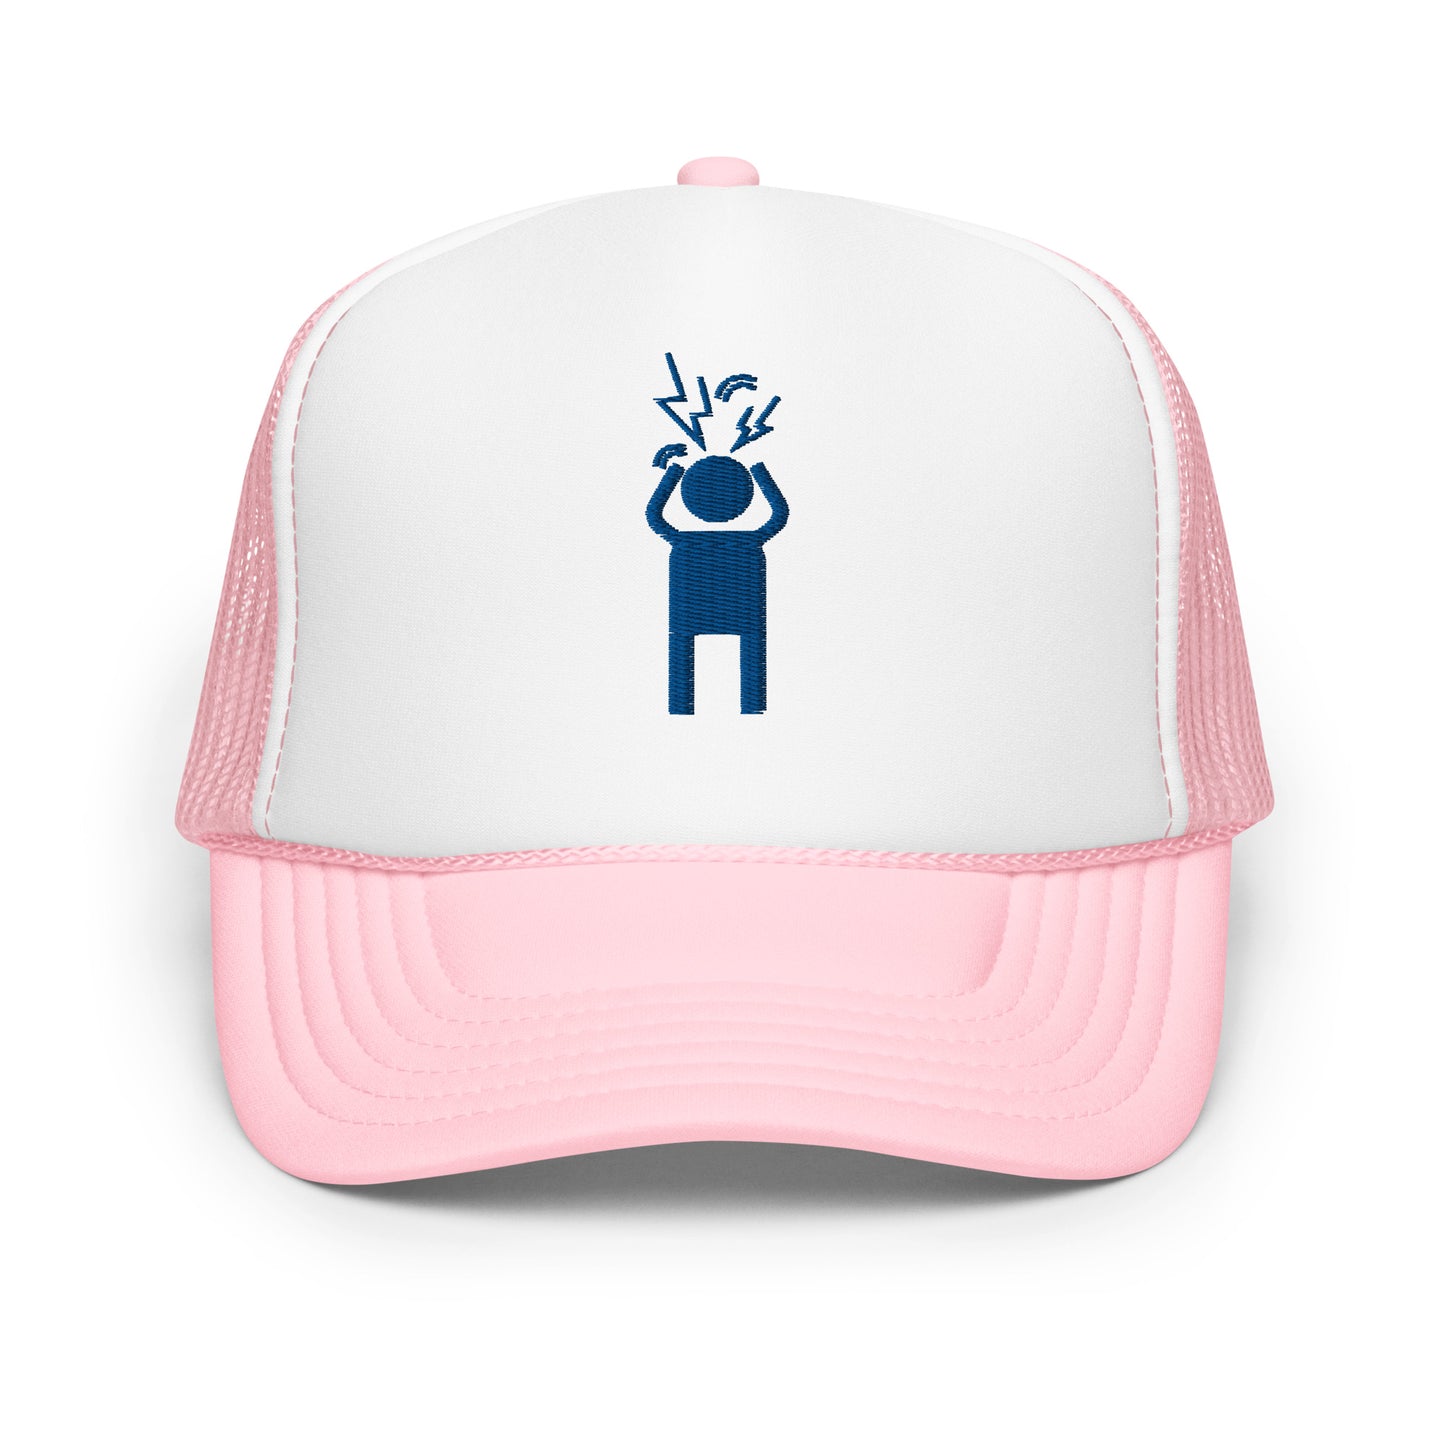 Screaming Person Embroidered Trucker Hat